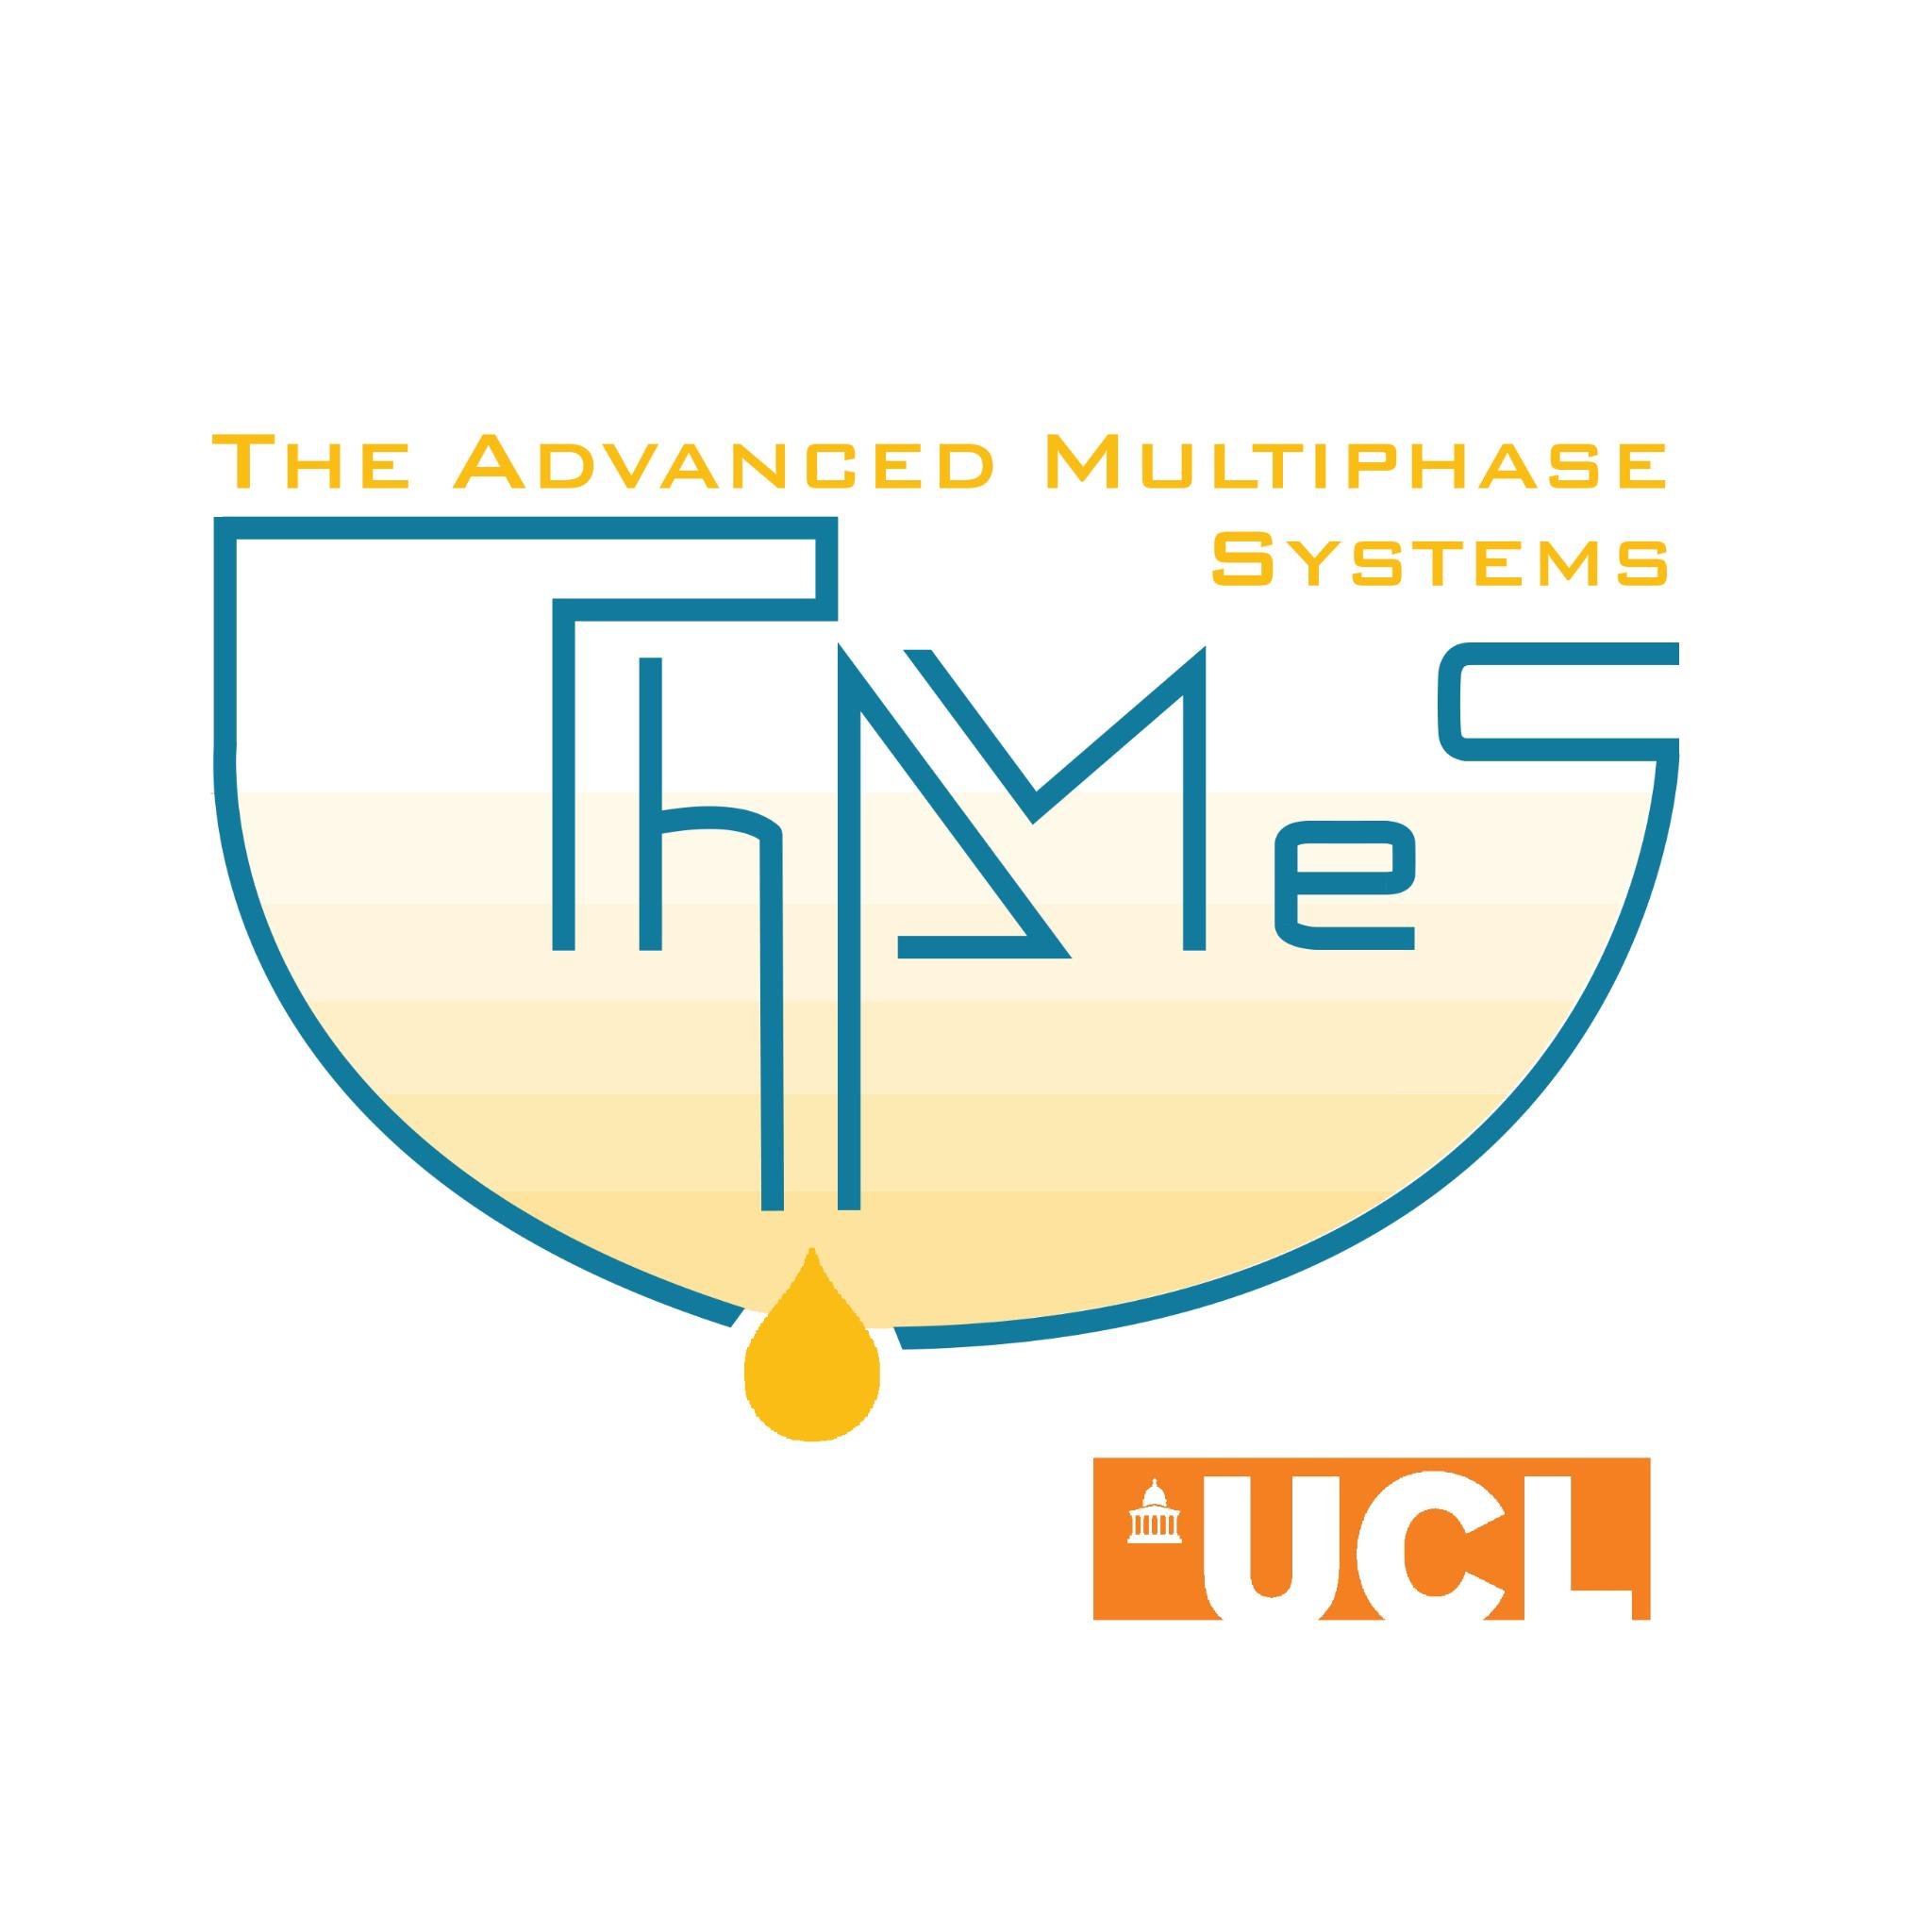 ThAMeS@UCL: The Advanced Multiphase Systems